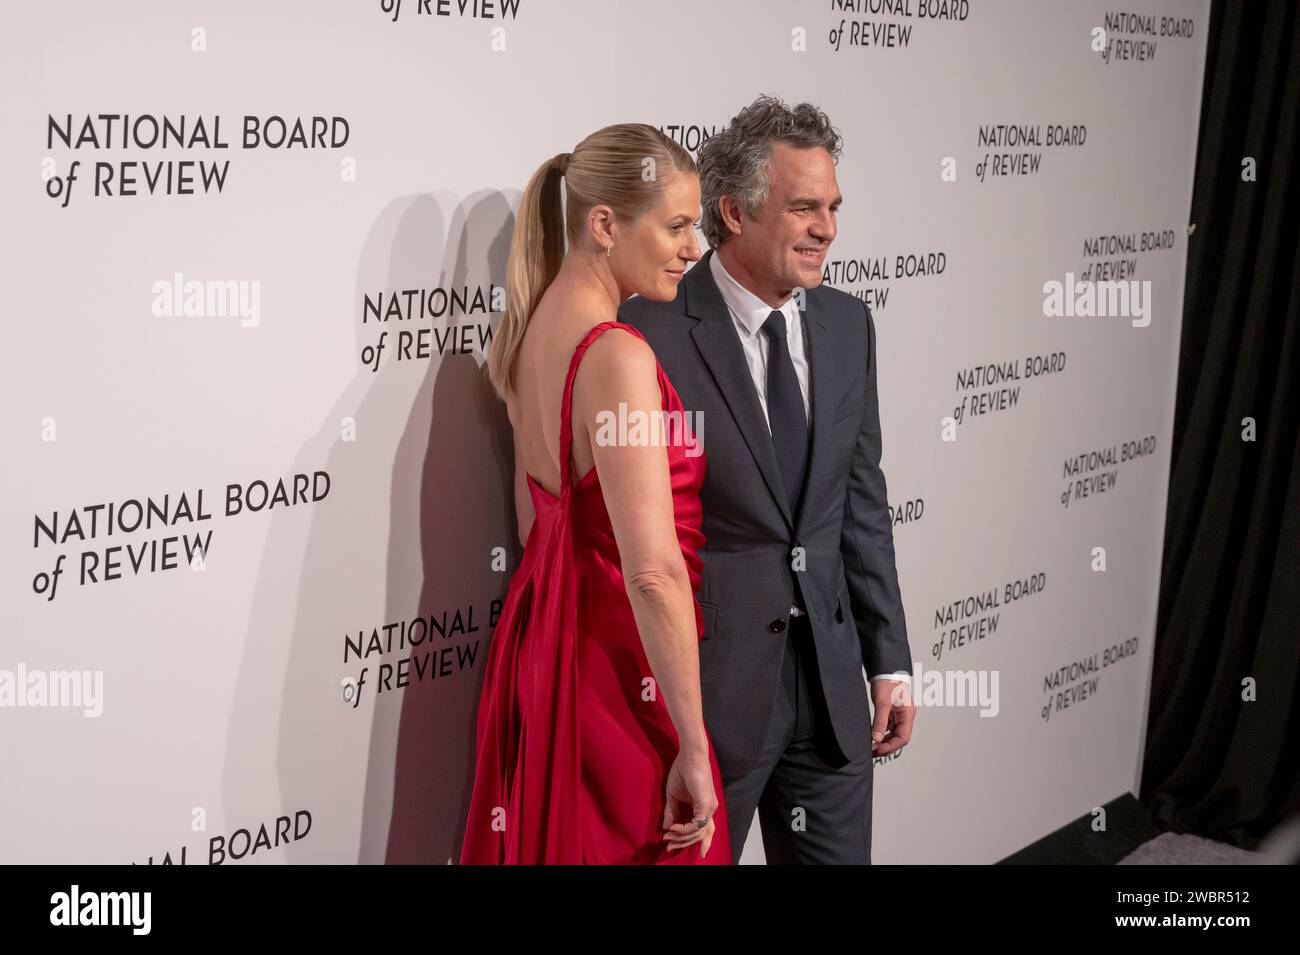 New York, Usa. Januar 2024. (L-R) Sunrise Coigney und Mark Ruffalo nehmen 2024 an der National Board of Review Gala in der Cipriani 42nd Street in New York Teil. Quelle: SOPA Images Limited/Alamy Live News Stockfoto